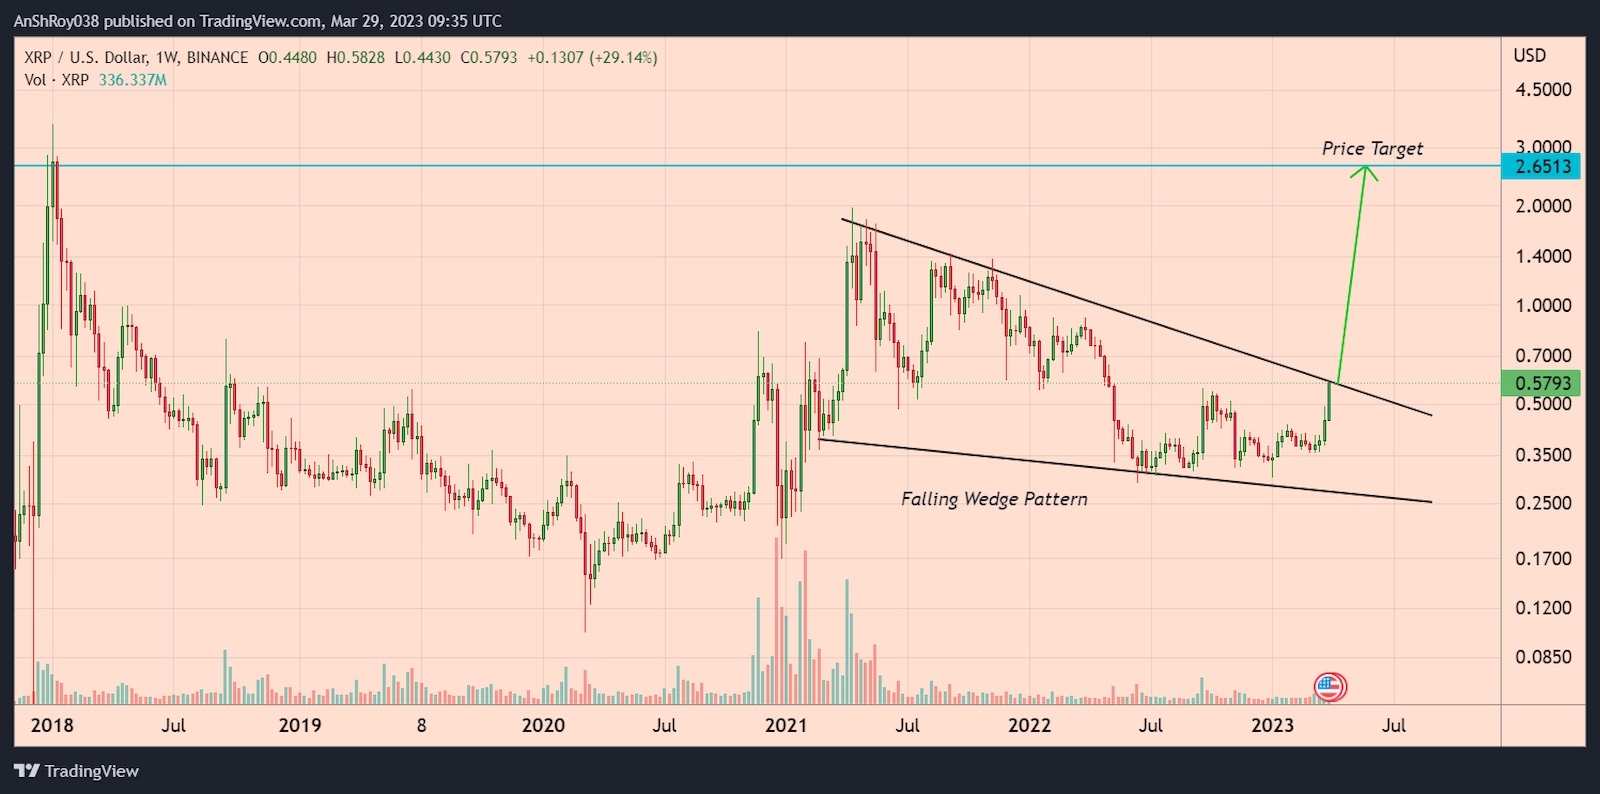 XRP formed a falling wedge pattern with a 357% price target